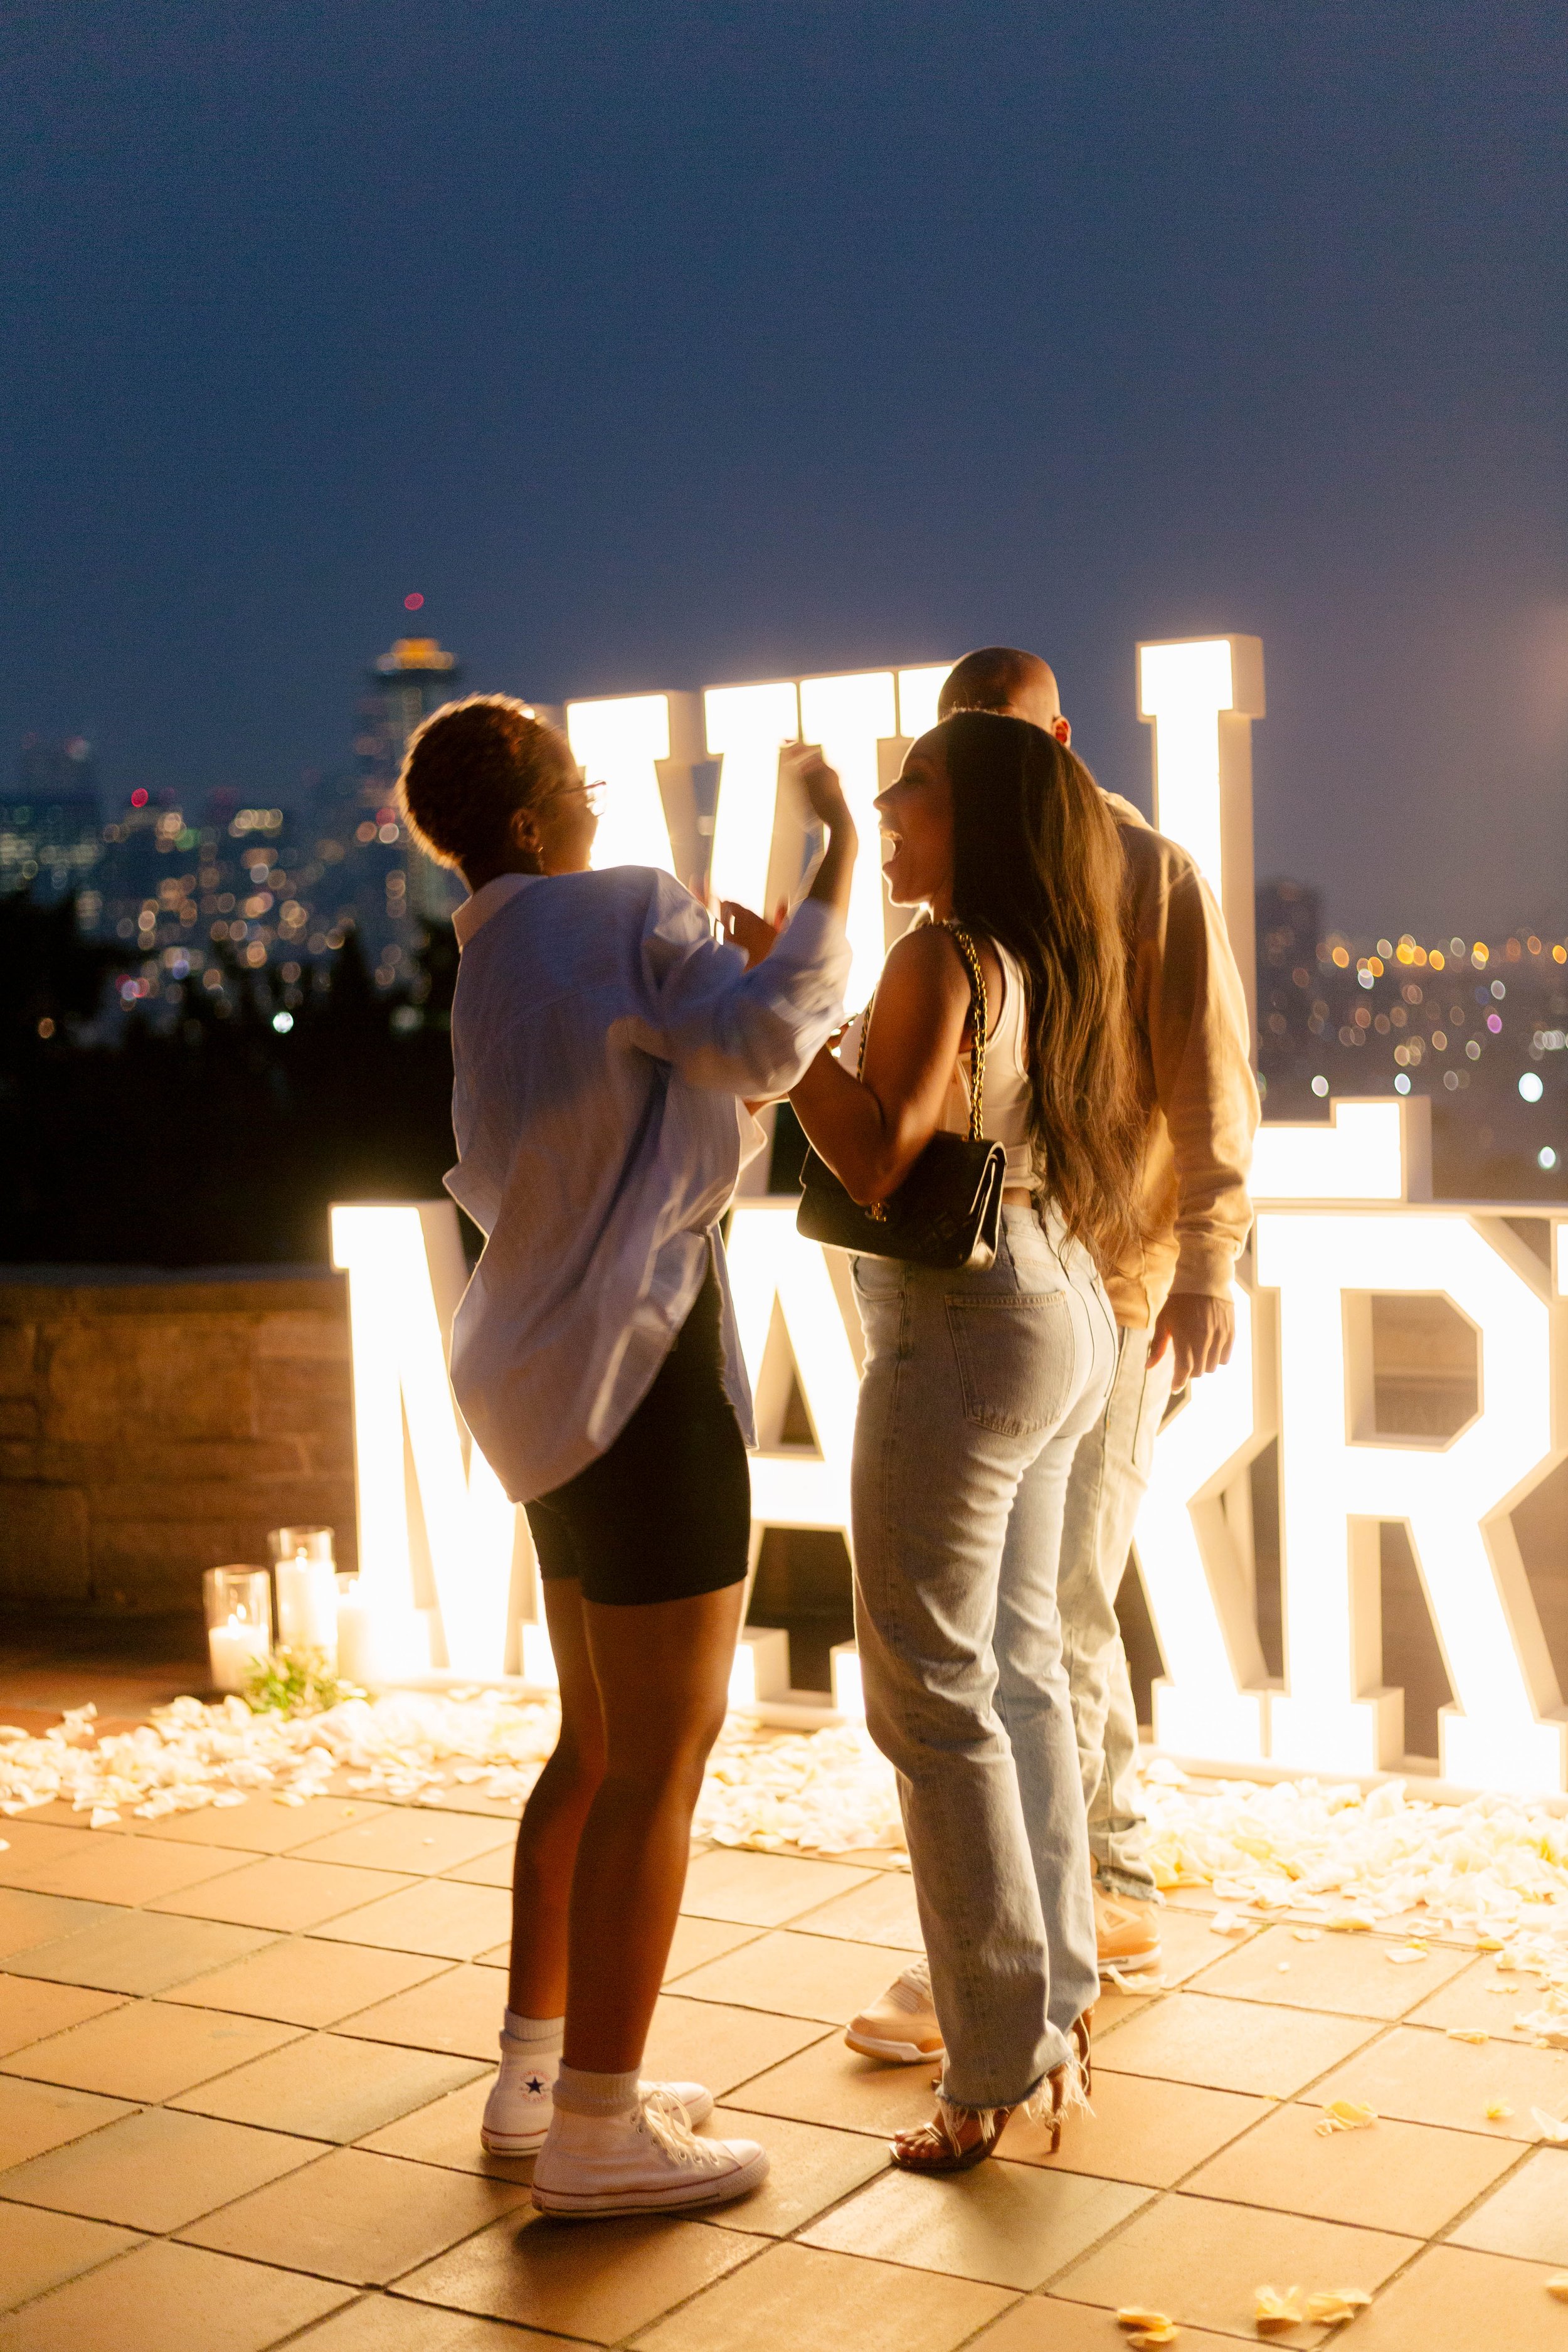 pacific-engagements-wedding-planning-and-design-tyler-lockett-engaged-to-lauren-jackson-kerry-park-kerry-jeanne-photography-a-to-z-marquee-letter-rental-seattle